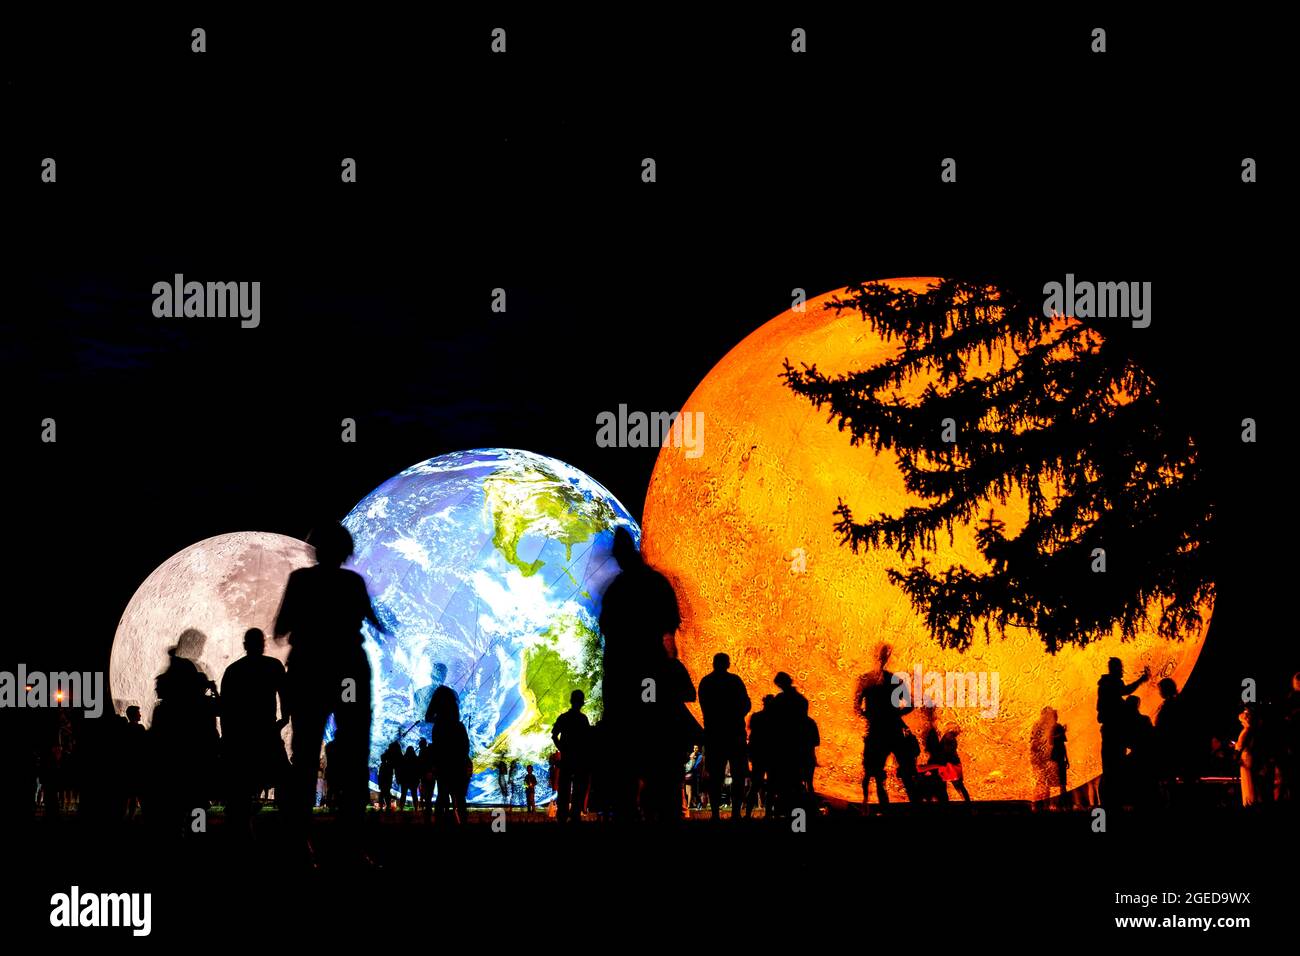 BRNO, Czech Republic - August, 14. 2020 Giant inflatable model of the planets Mars, Earth and Moon at night with silhouettes of people. Solar system Stock Photo